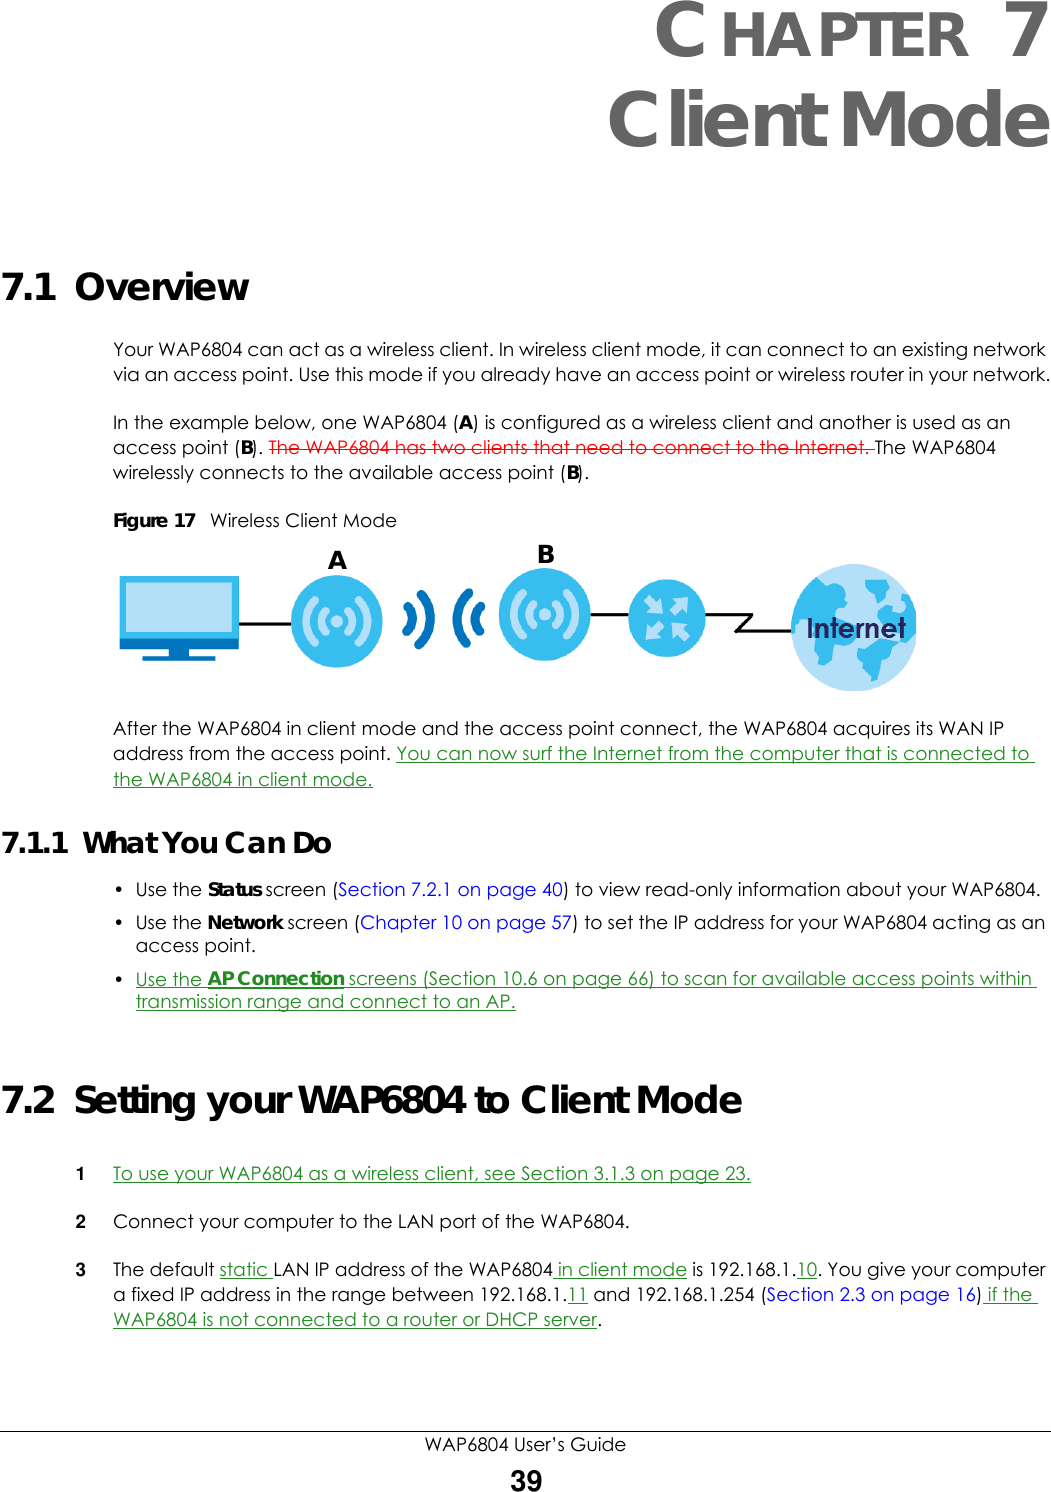 WAP6804 User’s Guide39CHAPTER 7Client Mode7.1  OverviewYour WAP6804 can act as a wireless client. In wireless client mode, it can connect to an existing network via an access point. Use this mode if you already have an access point or wireless router in your network.In the example below, one WAP6804 (A) is configured as a wireless client and another is used as an access point (B). The WAP6804 has two clients that need to connect to the Internet. The WAP6804 wirelessly connects to the available access point (B).Figure 17   Wireless Client ModeAfter the WAP6804 in client mode and the access point connect, the WAP6804 acquires its WAN IP address from the access point. You can now surf the Internet from the computer that is connected to the WAP6804 in client mode.7.1.1  What You Can Do• Use the Status screen (Section 7.2.1 on page 40) to view read-only information about your WAP6804.• Use the Network screen (Chapter 10 on page 57) to set the IP address for your WAP6804 acting as an access point.•Use the AP Connection screens (Section 10.6 on page 66) to scan for available access points within transmission range and connect to an AP.7.2  Setting your WAP6804 to Client Mode1To use your WAP6804 as a wireless client, see Section 3.1.3 on page 23.2Connect your computer to the LAN port of the WAP6804. 3The default static LAN IP address of the WAP6804 in client mode is 192.168.1.10. You give your computer a fixed IP address in the range between 192.168.1.11 and 192.168.1.254 (Section 2.3 on page 16) if the WAP6804 is not connected to a router or DHCP server. AB